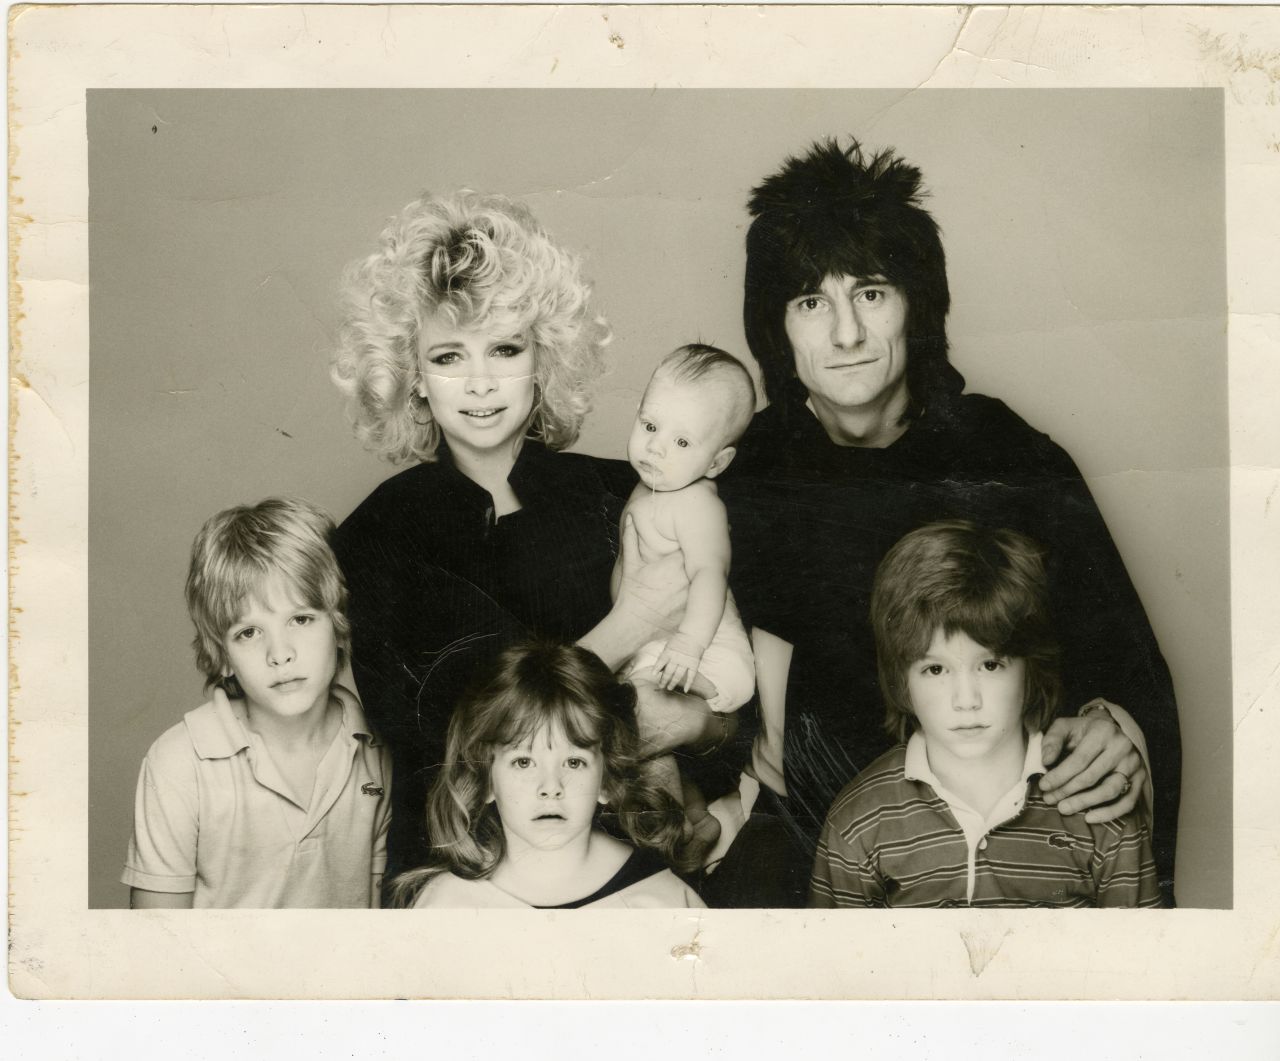 Pictured here is Ronnie Wood with Jo and their children in early 1980s. They had two children together -- daughter Leah and son Tyrone, and they each had one child from previous marriages. 